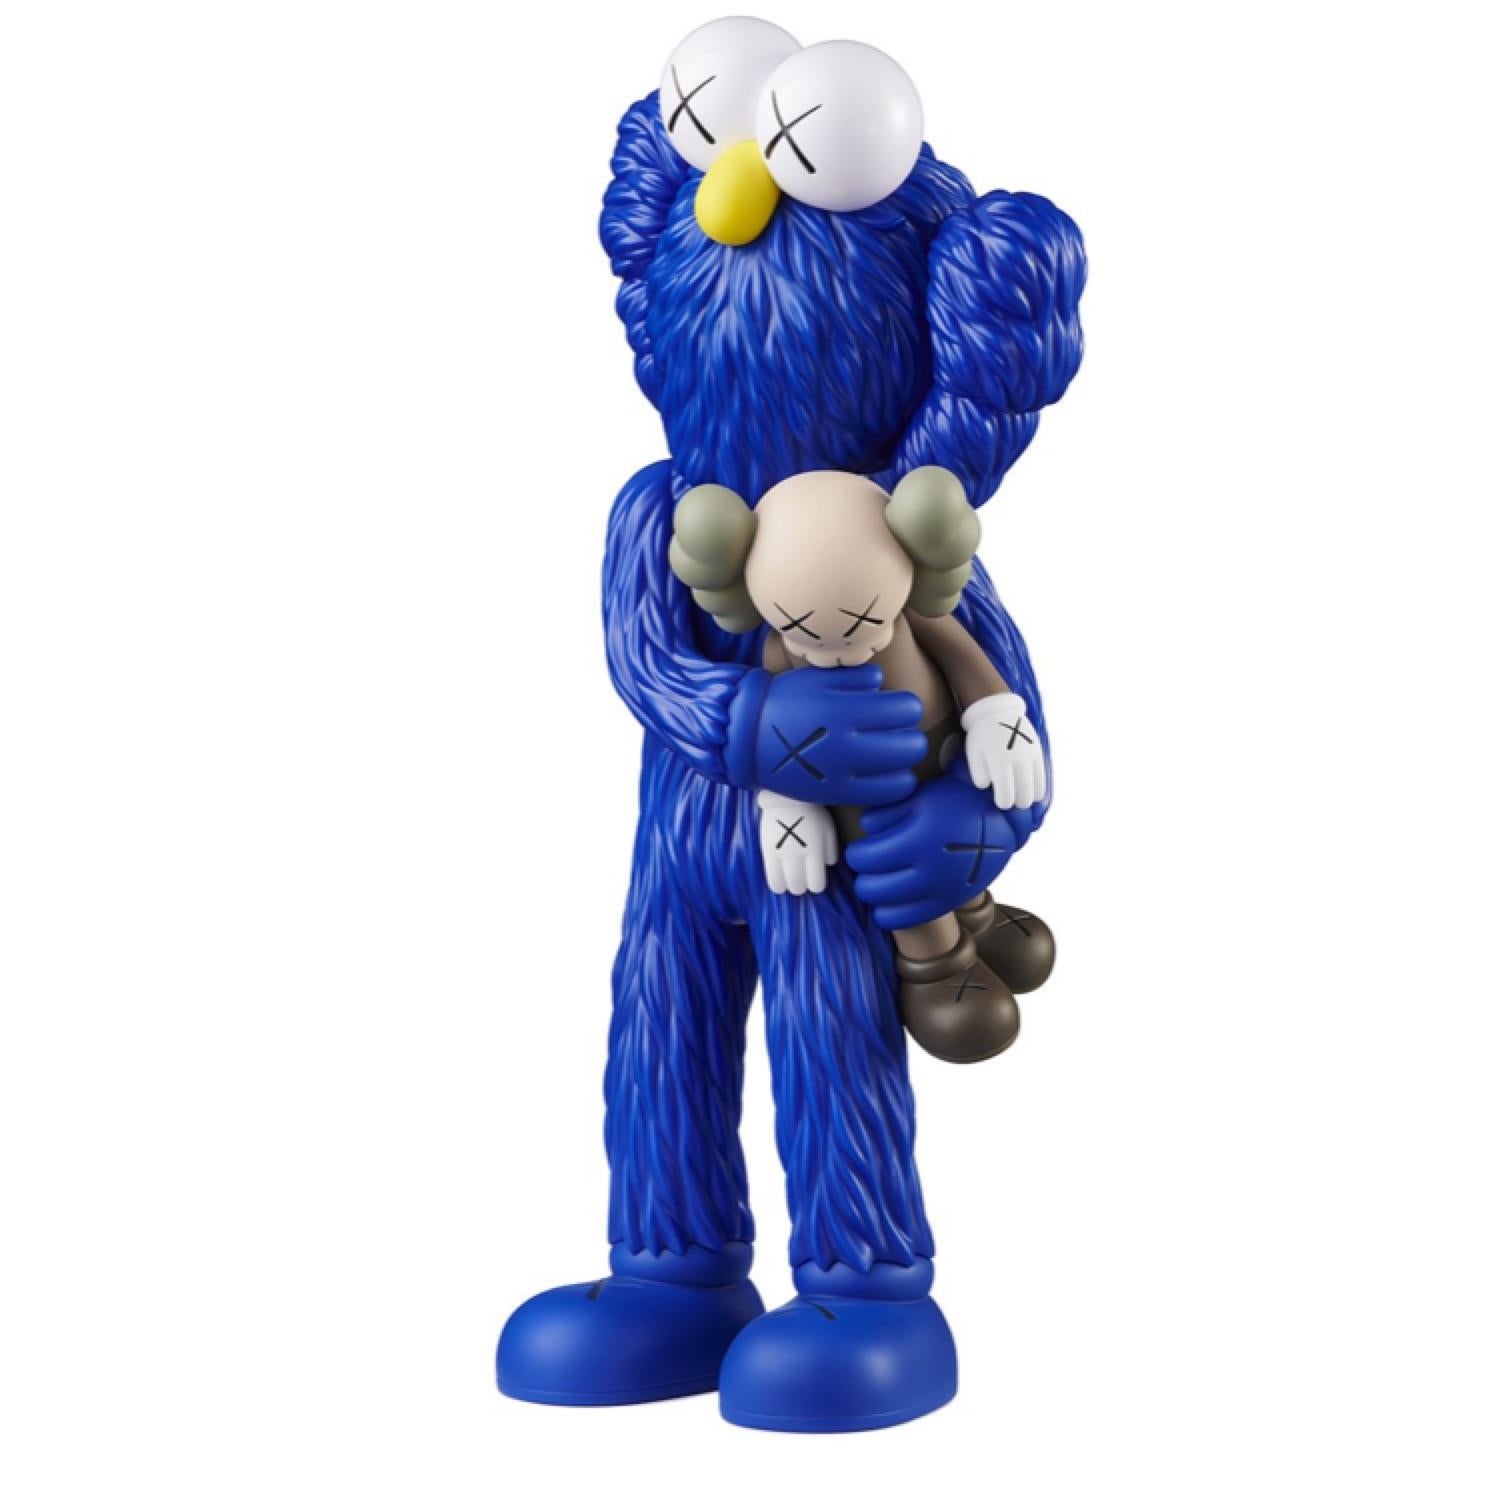 This is a brand new piece in perfect condition. 

Several months after releasing the KAWS Share Figure in February, the artist released his long anticipated KAWS Take Figure. The figure, which features a blue BFF holding a brown Companion, is the